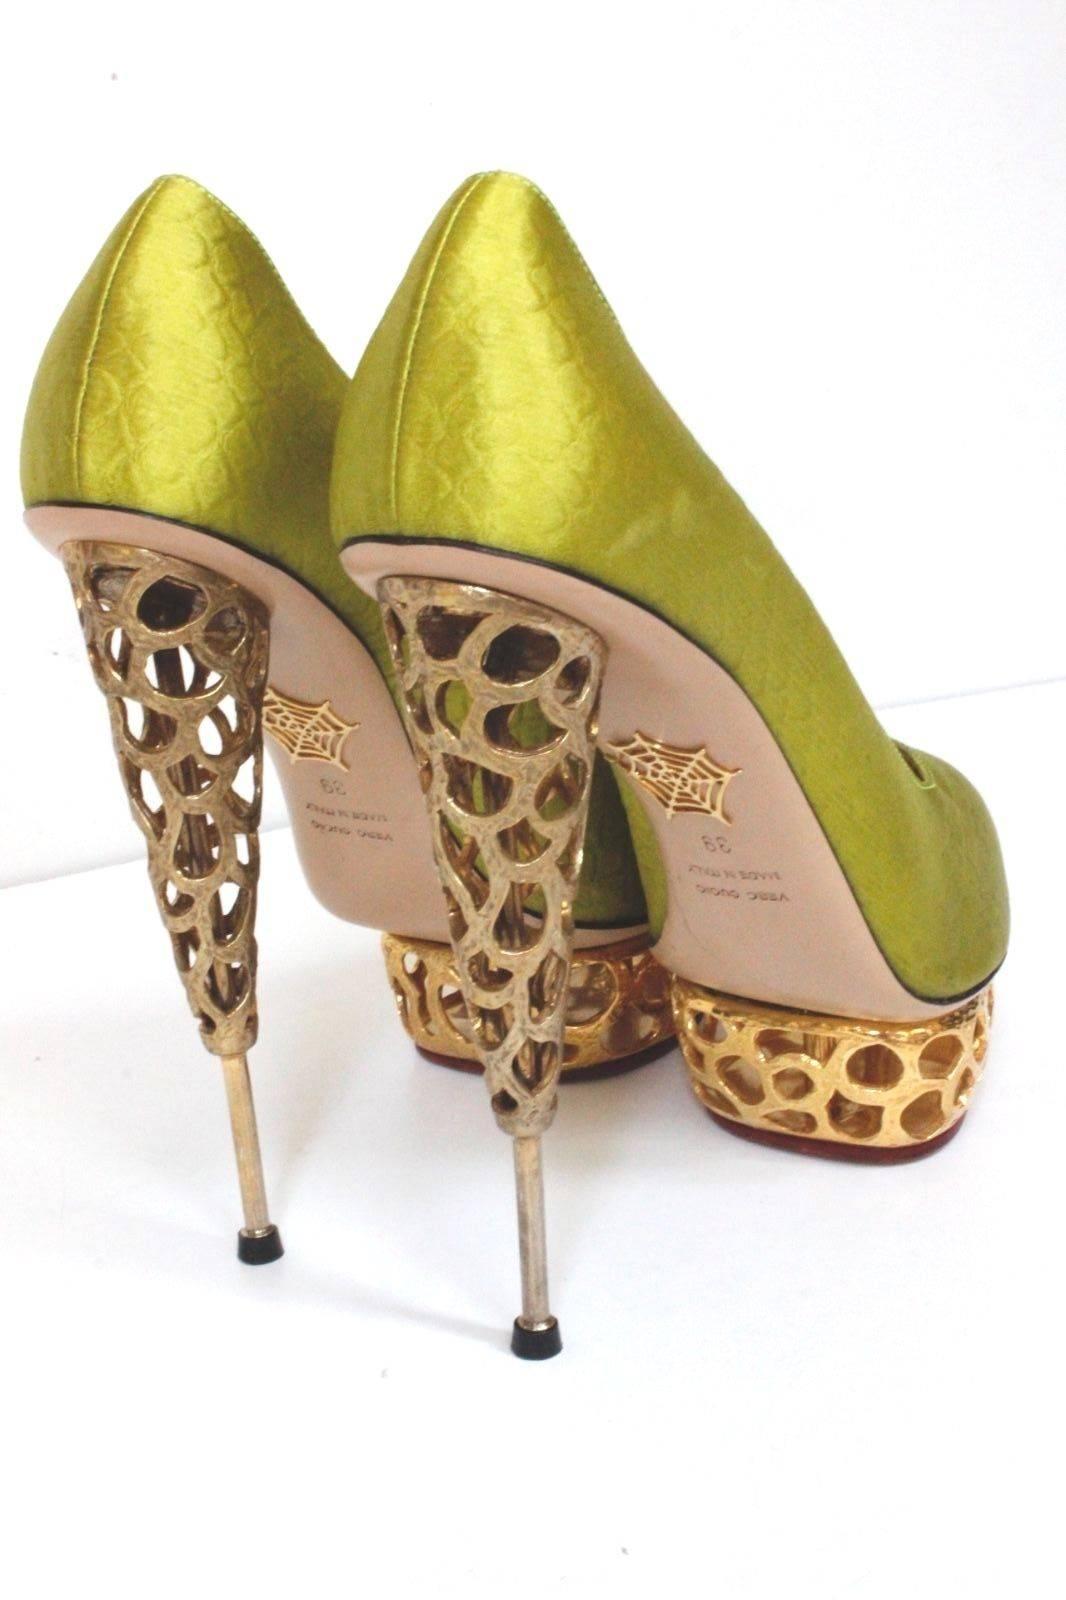 New CHARLOTTE OLYMPIA Chartreuse 'Objets D'Art' pumps 39 uk 5-6 
True to its rarefied name, a stunning round-toe pump done in chartreuse satin rests regally atop a honeycomb of golden hardware (that takes seven days to craft) for a look that can